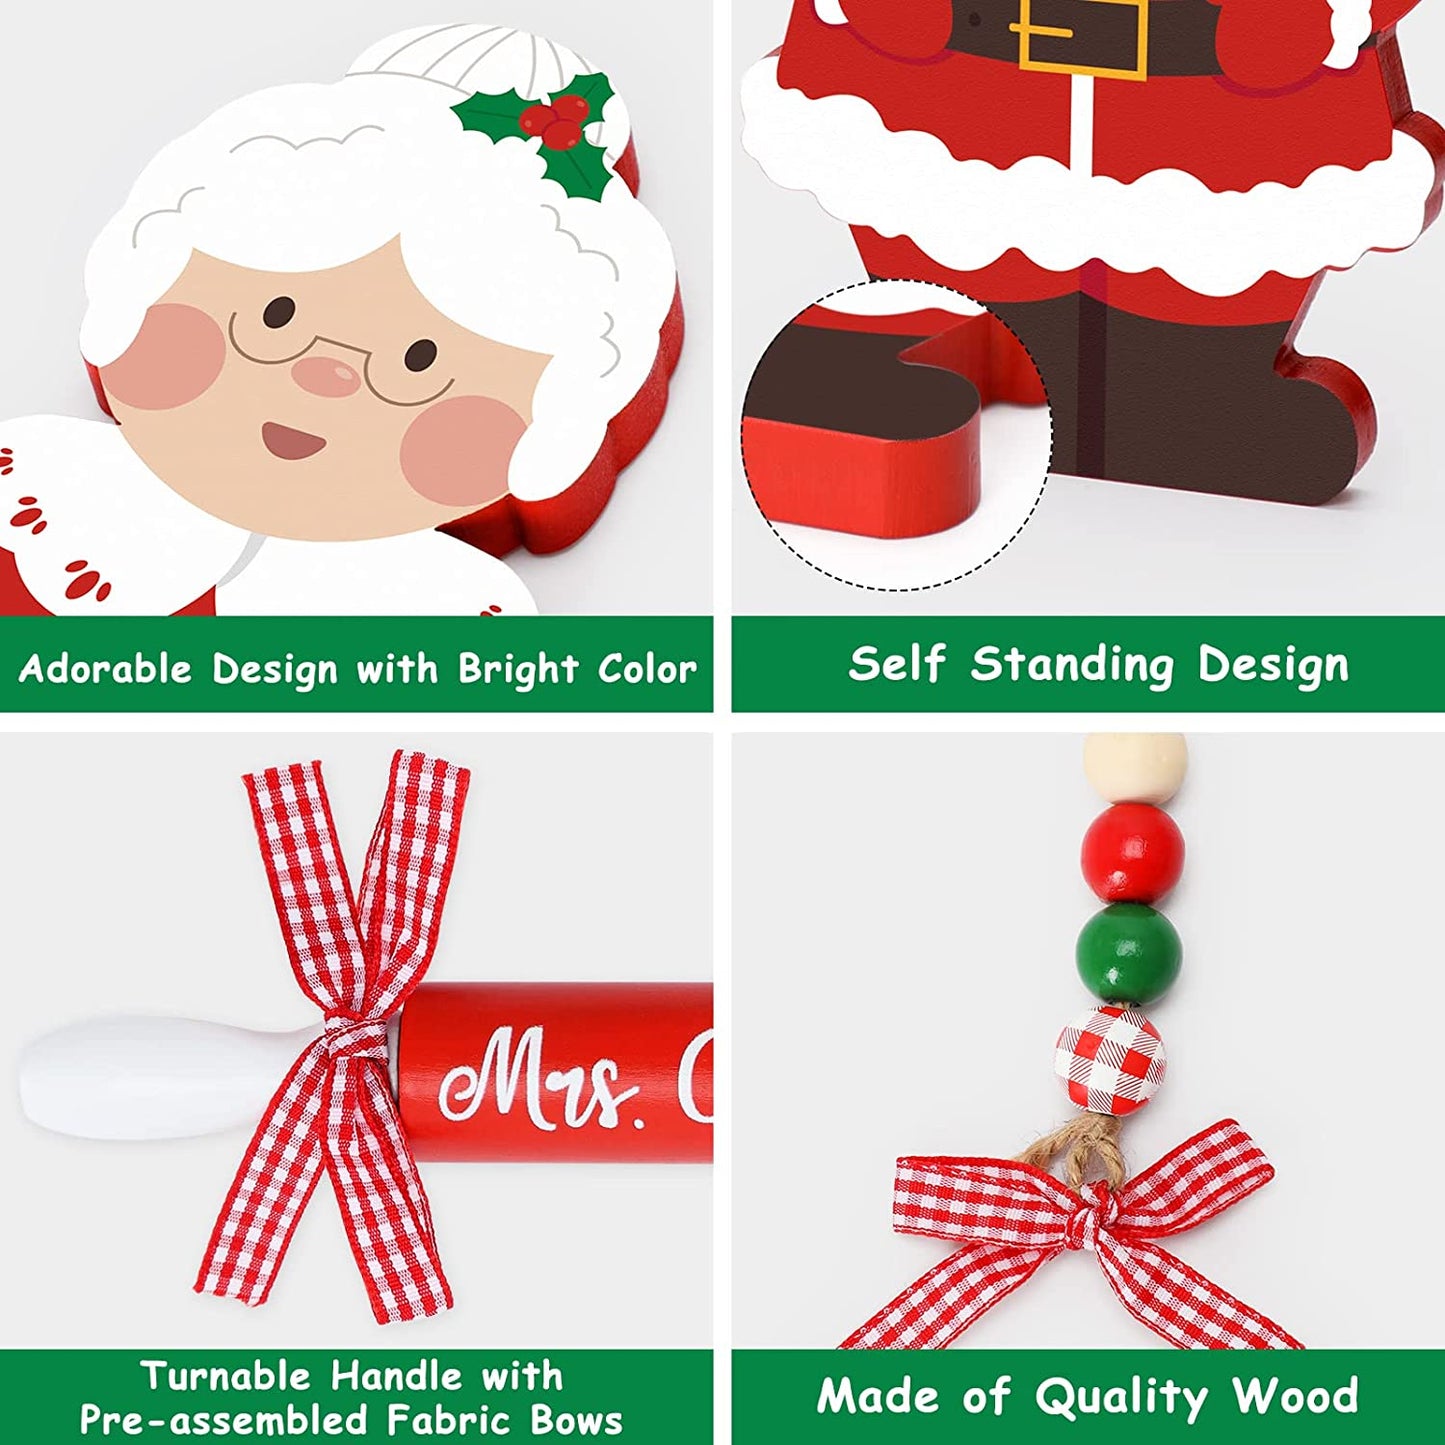 Mr. & Mrs. Claus Wooden Christmas Tiered Tray Decorations momhomedecor